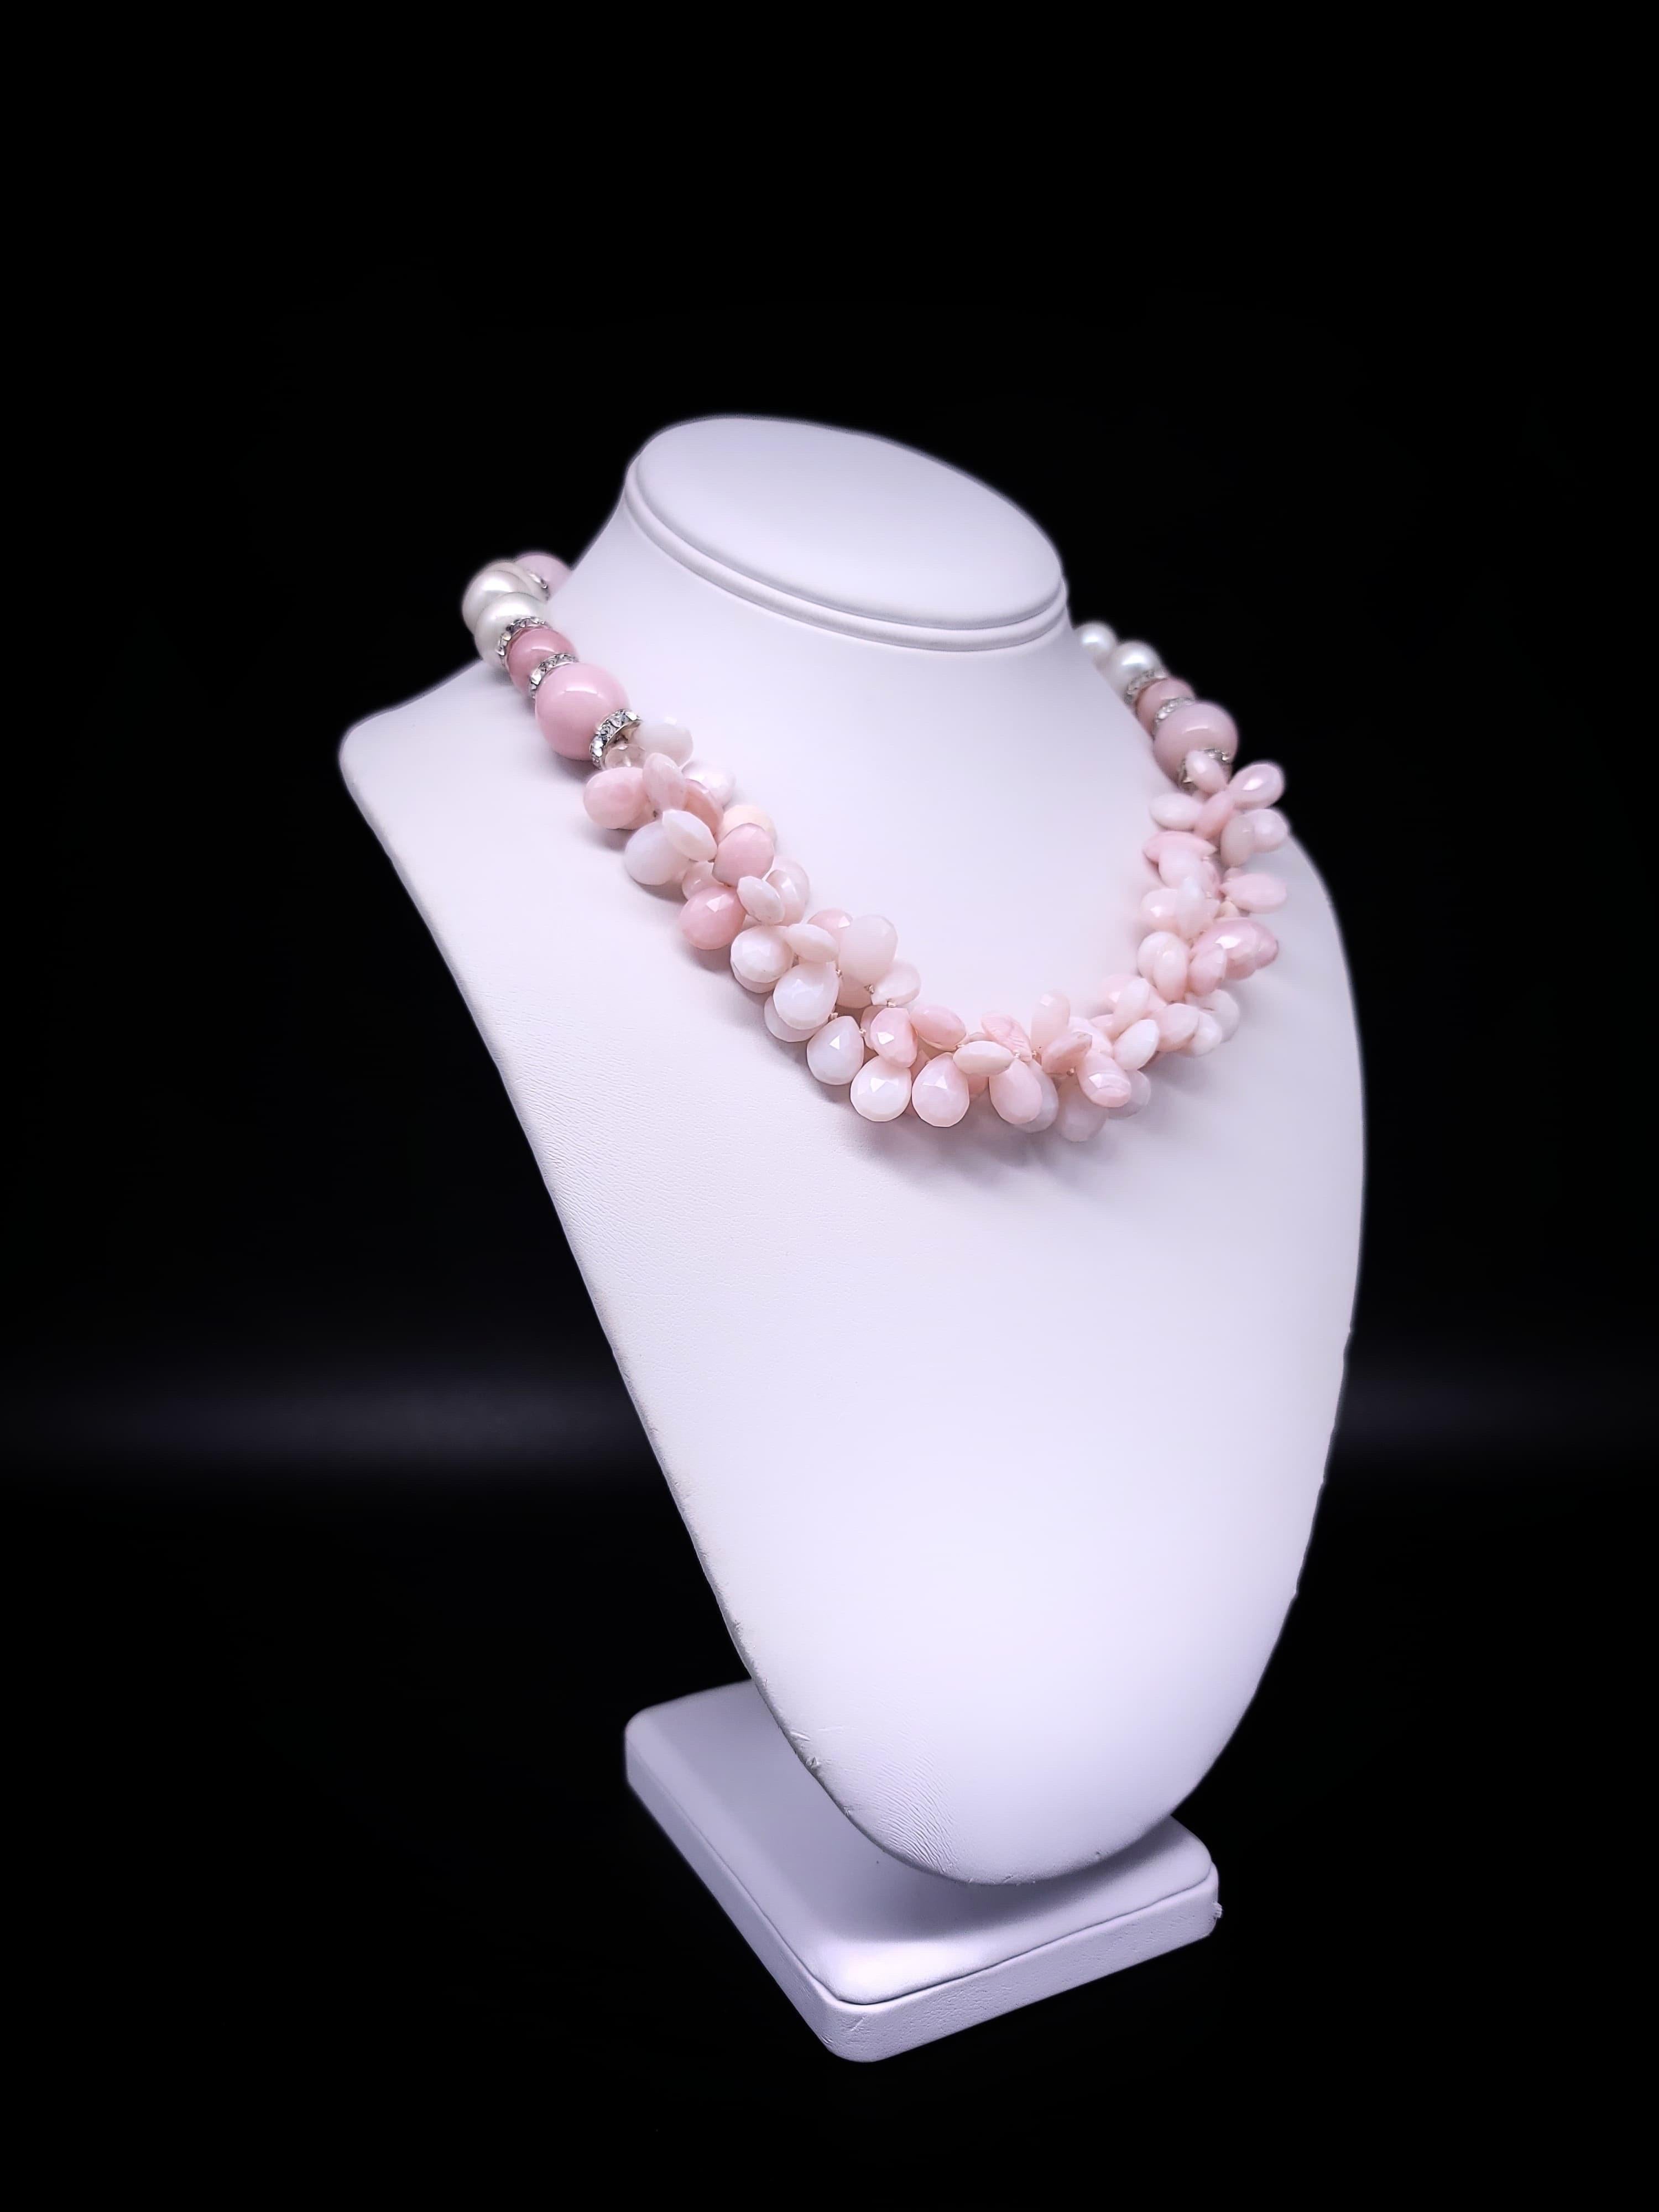 
Unique Elegance:

Elevate your style with the Pink Opal Softly Ruffled Bib Necklace—a truly one-of-a-kind piece. Delicate and feminine, this necklace features cascading ruffled faceted Opal teardrops in a lovely shade of pink, suspended from a